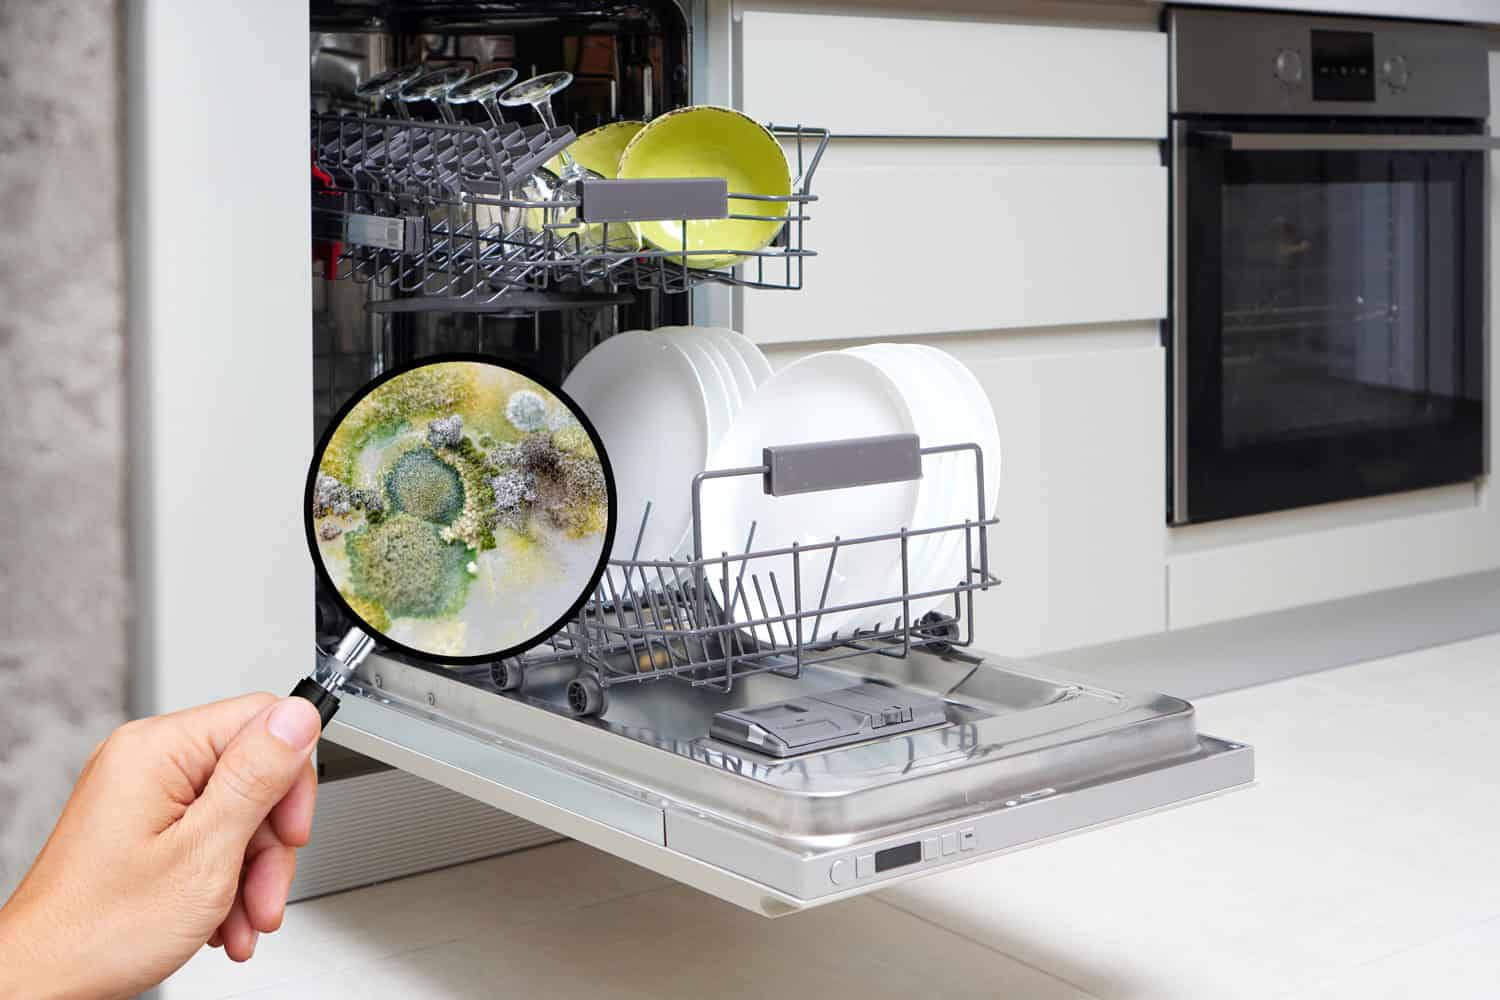 How To Clean Mold From Dishwasher